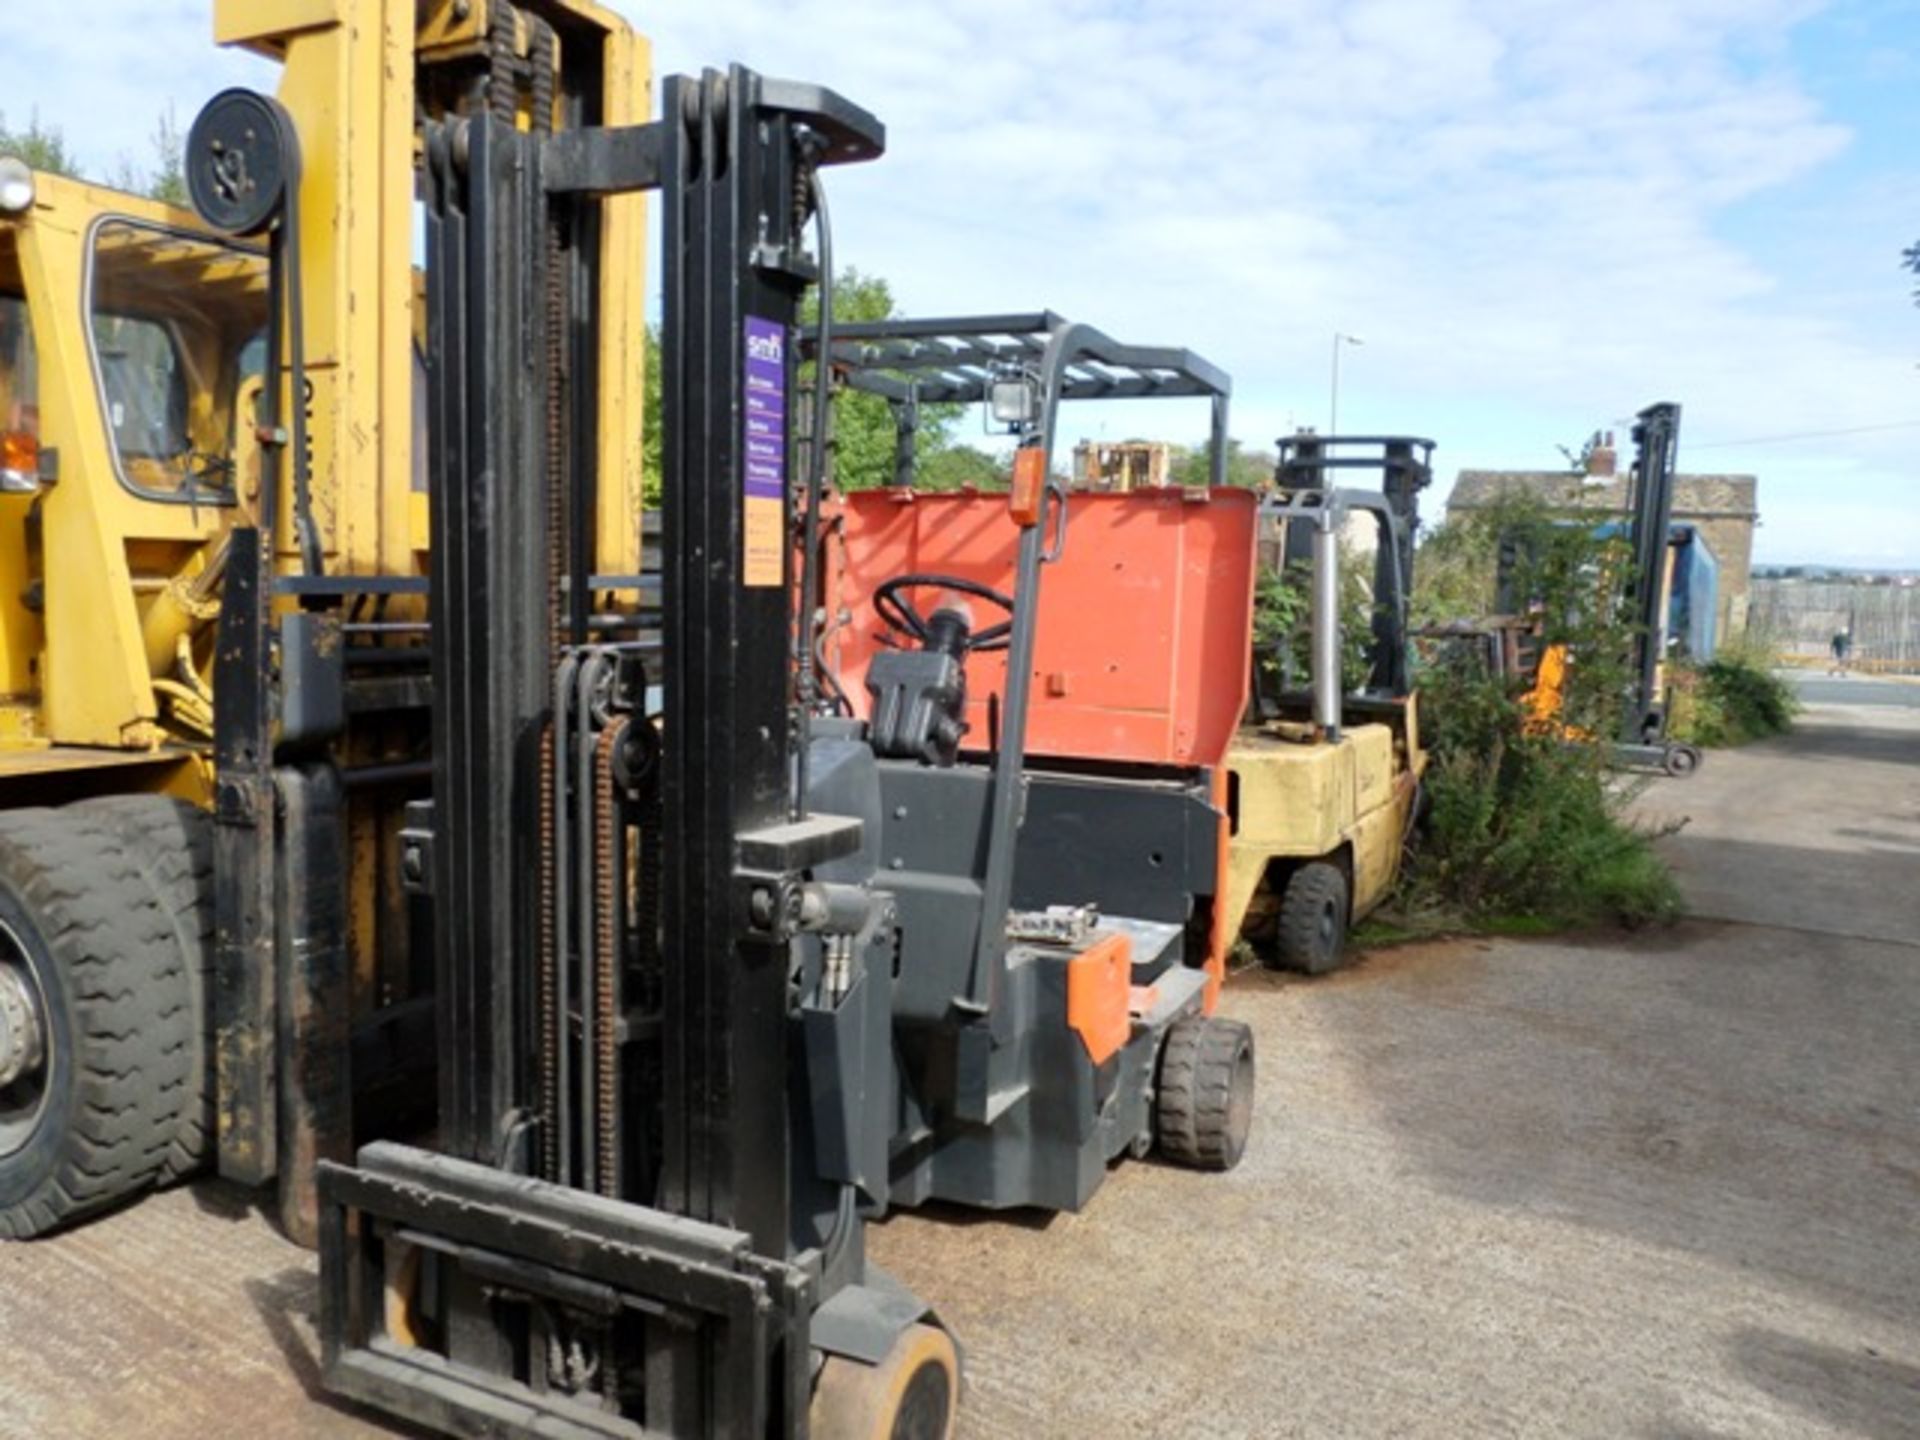 TOYOTA DPV15 Electric - VIN: TL3964 - Year: 1999 - N/A Hours - Articulated Forklift, 5M Triplex